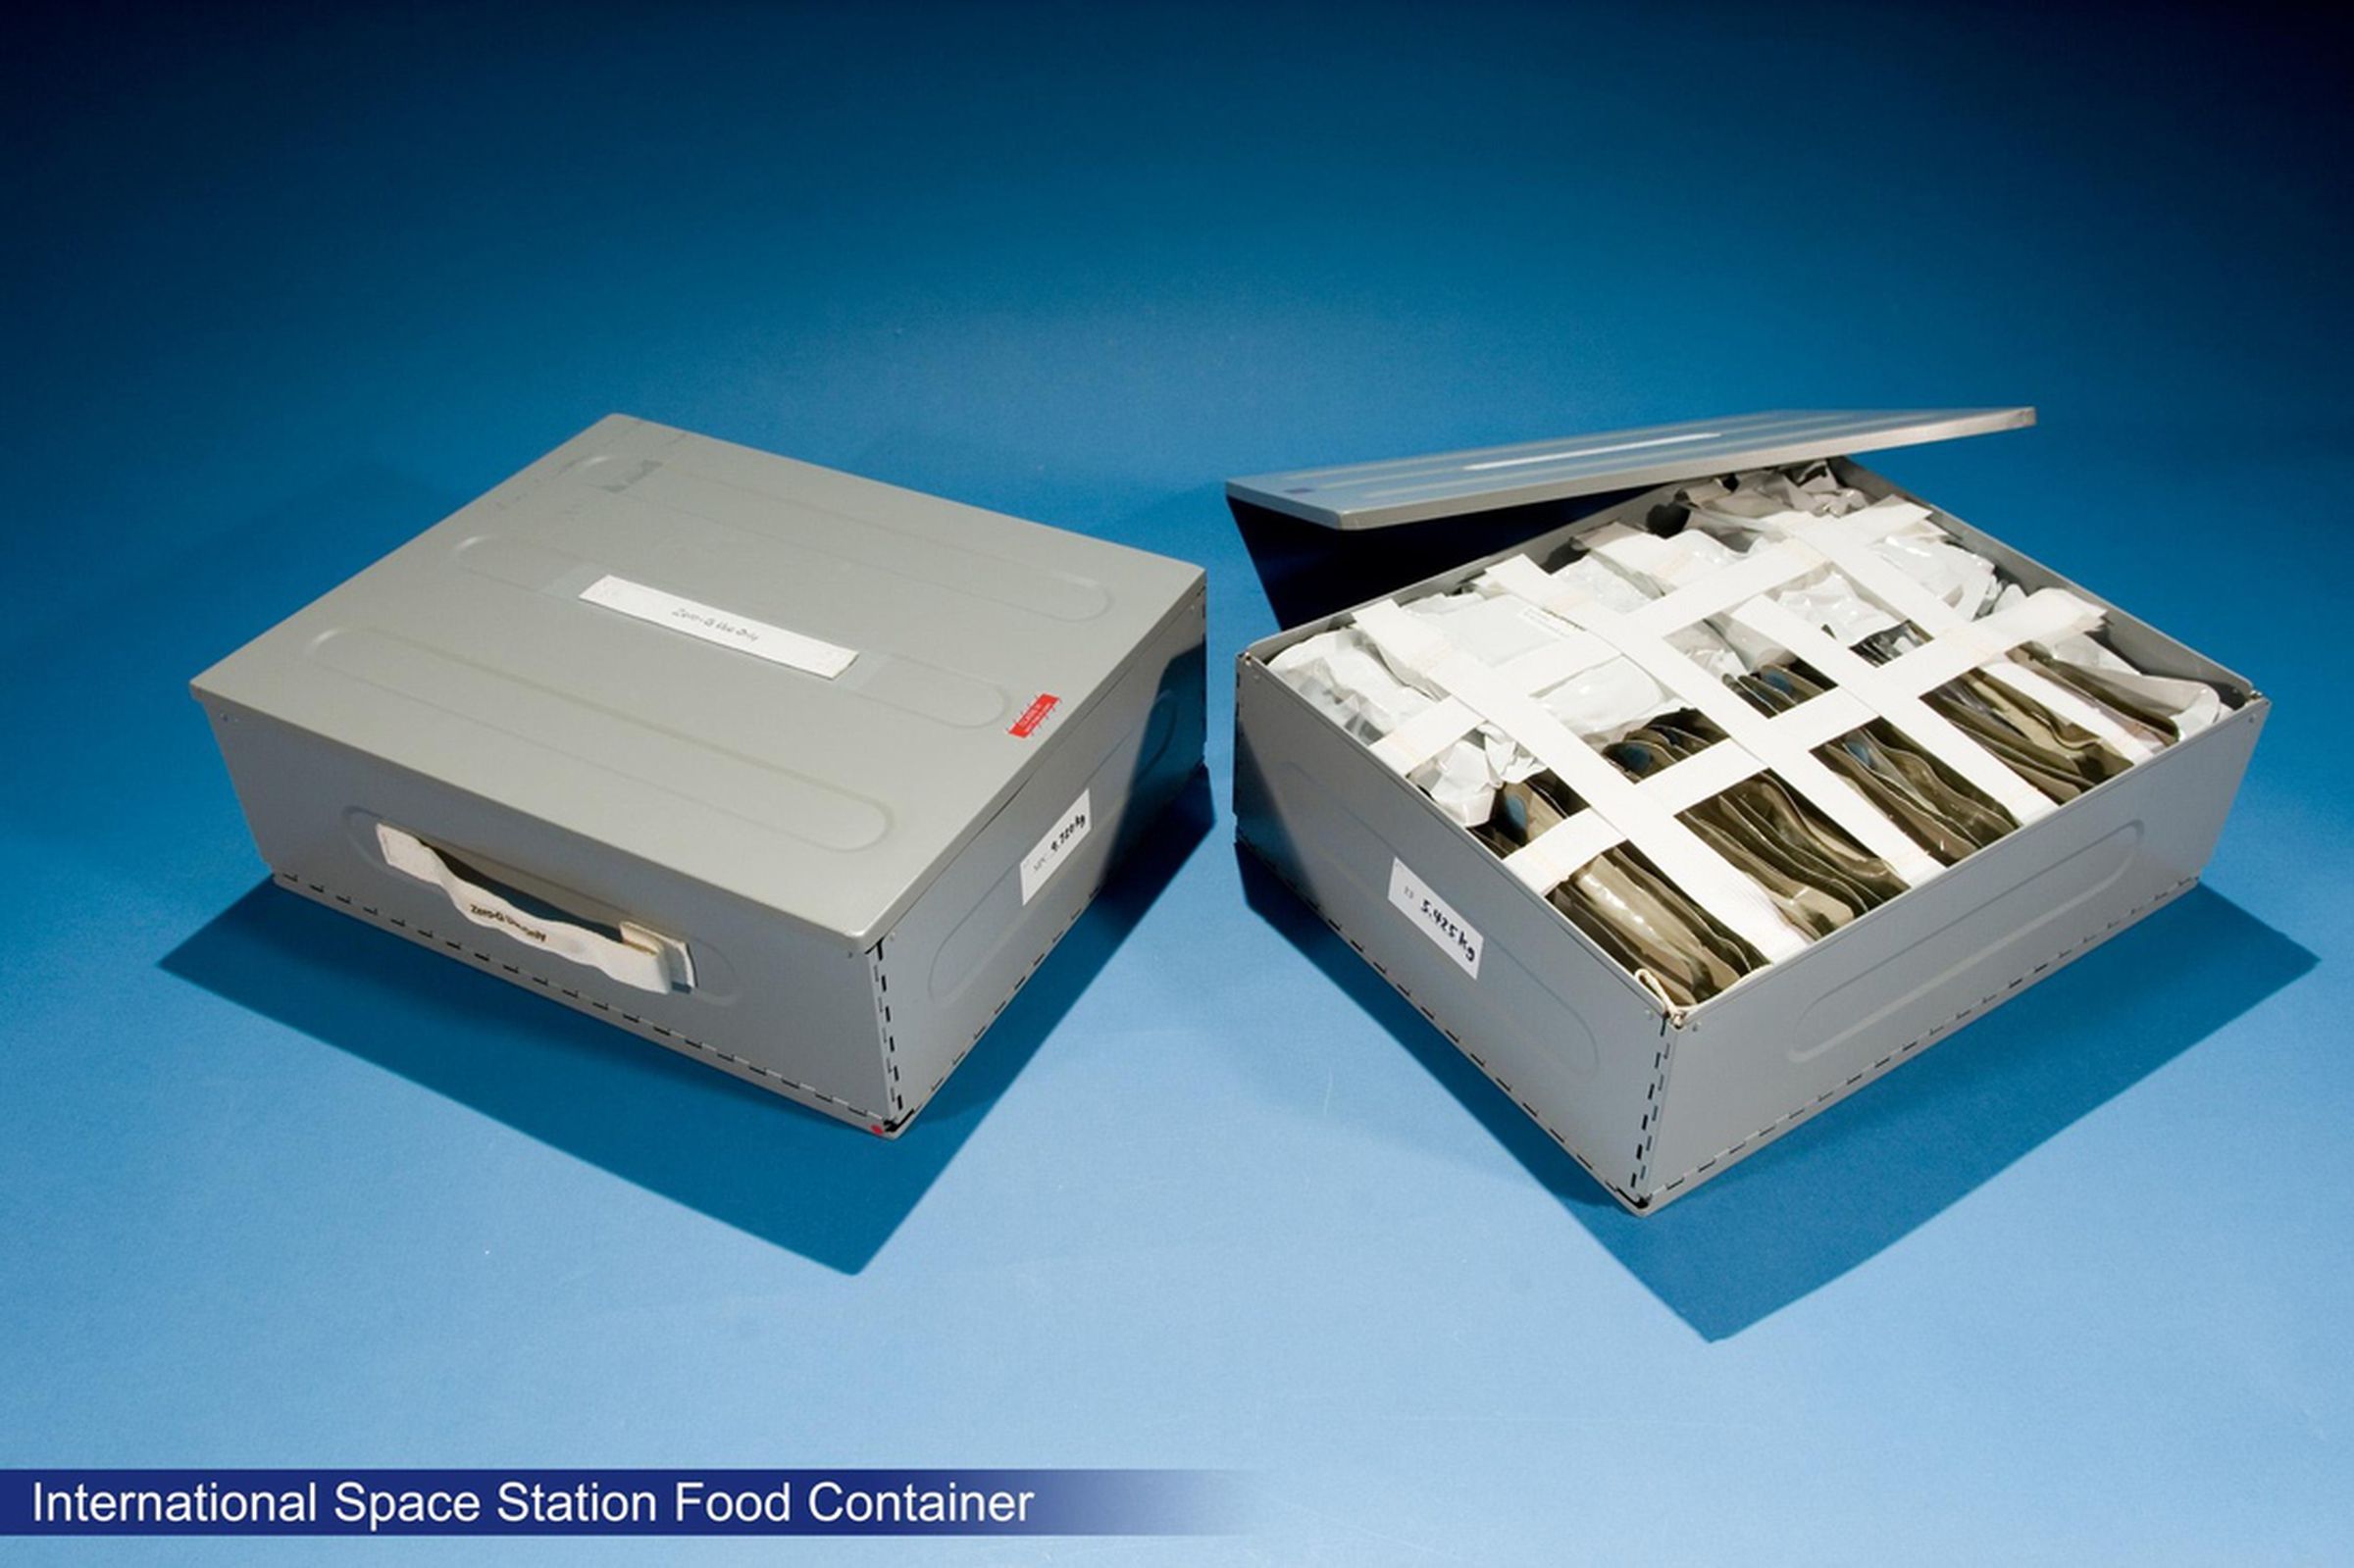 Photos from NASA's Space Food Systems Laboratory